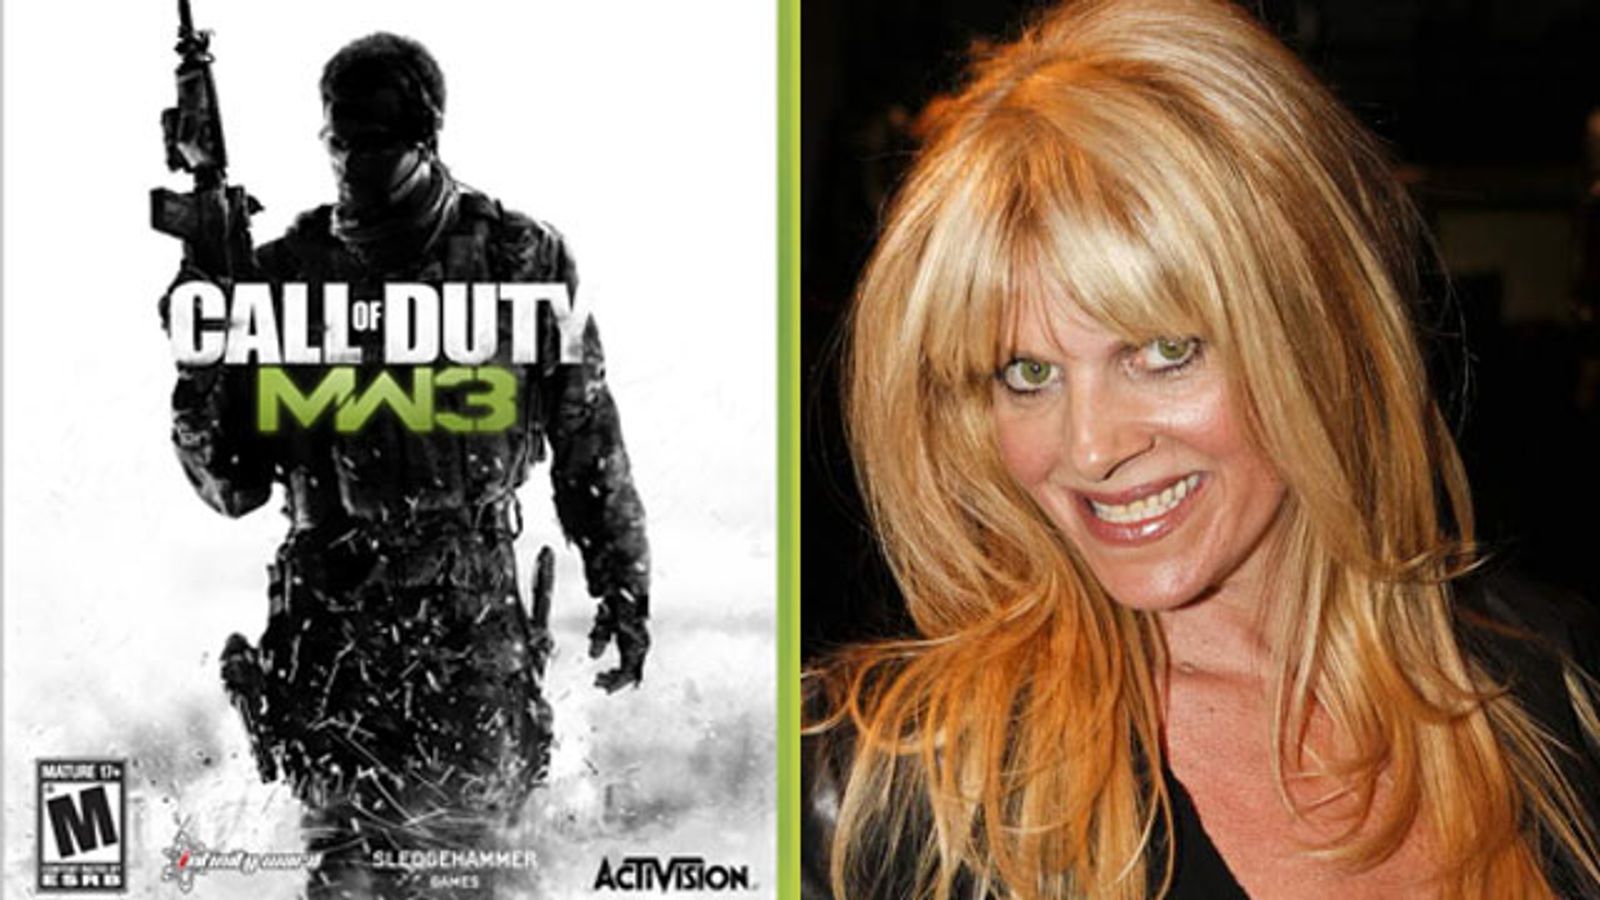 Dutch Porn Star Gets Disinvited From VIP Party by Activision